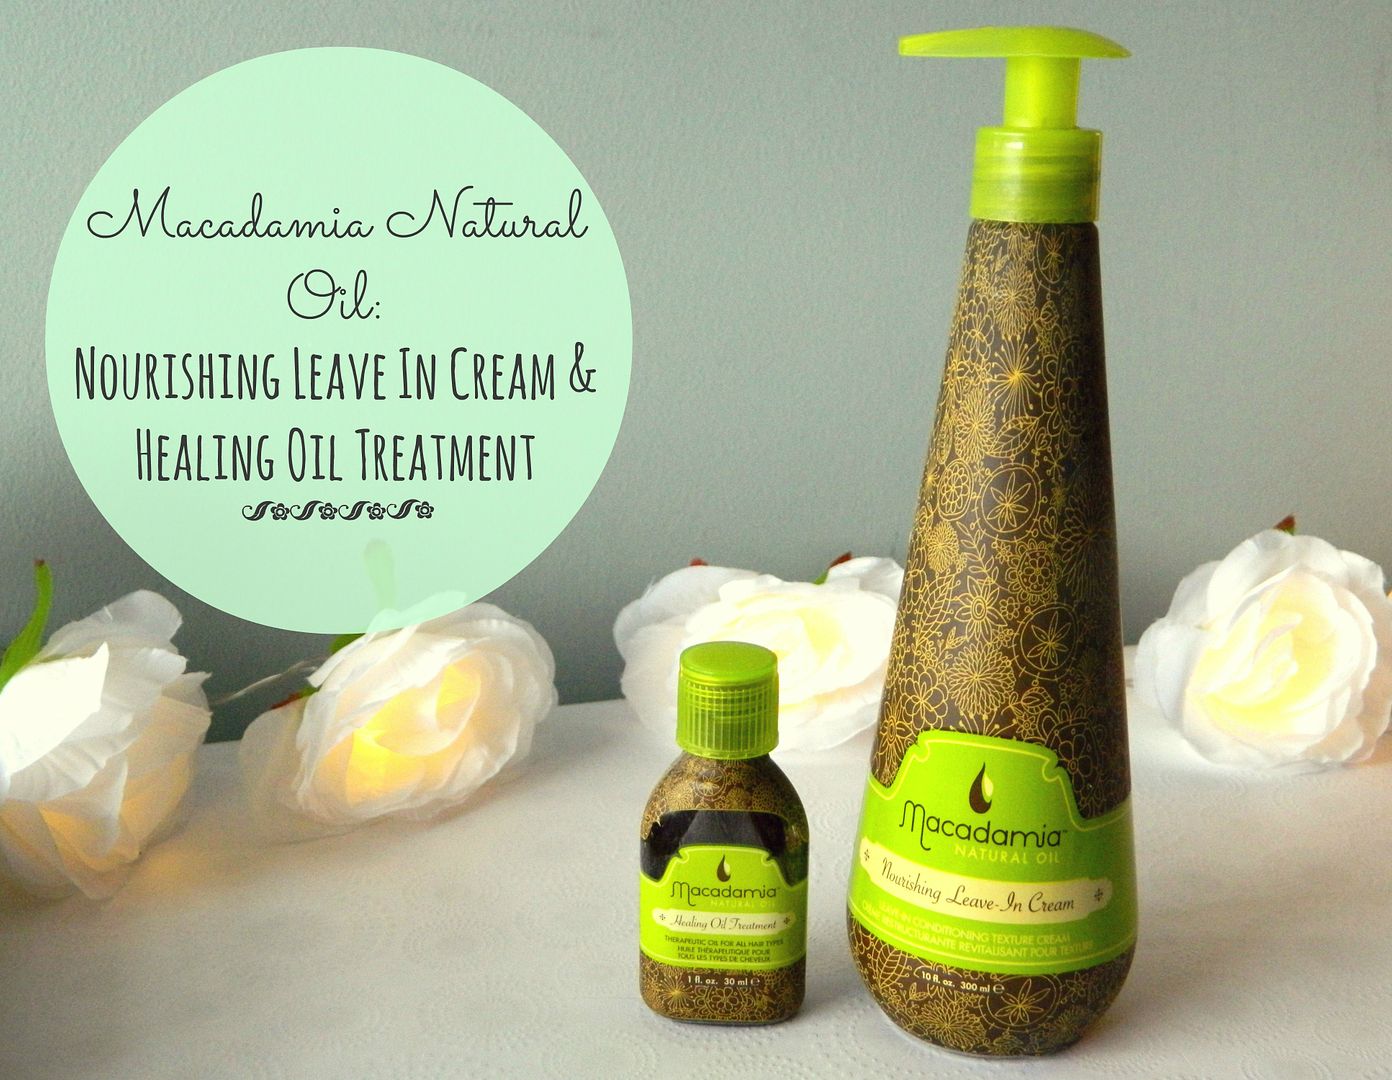 Macadamia Natural Oil Nourishing Leave In Cream Healing Oil Treatment Review Belle-amie